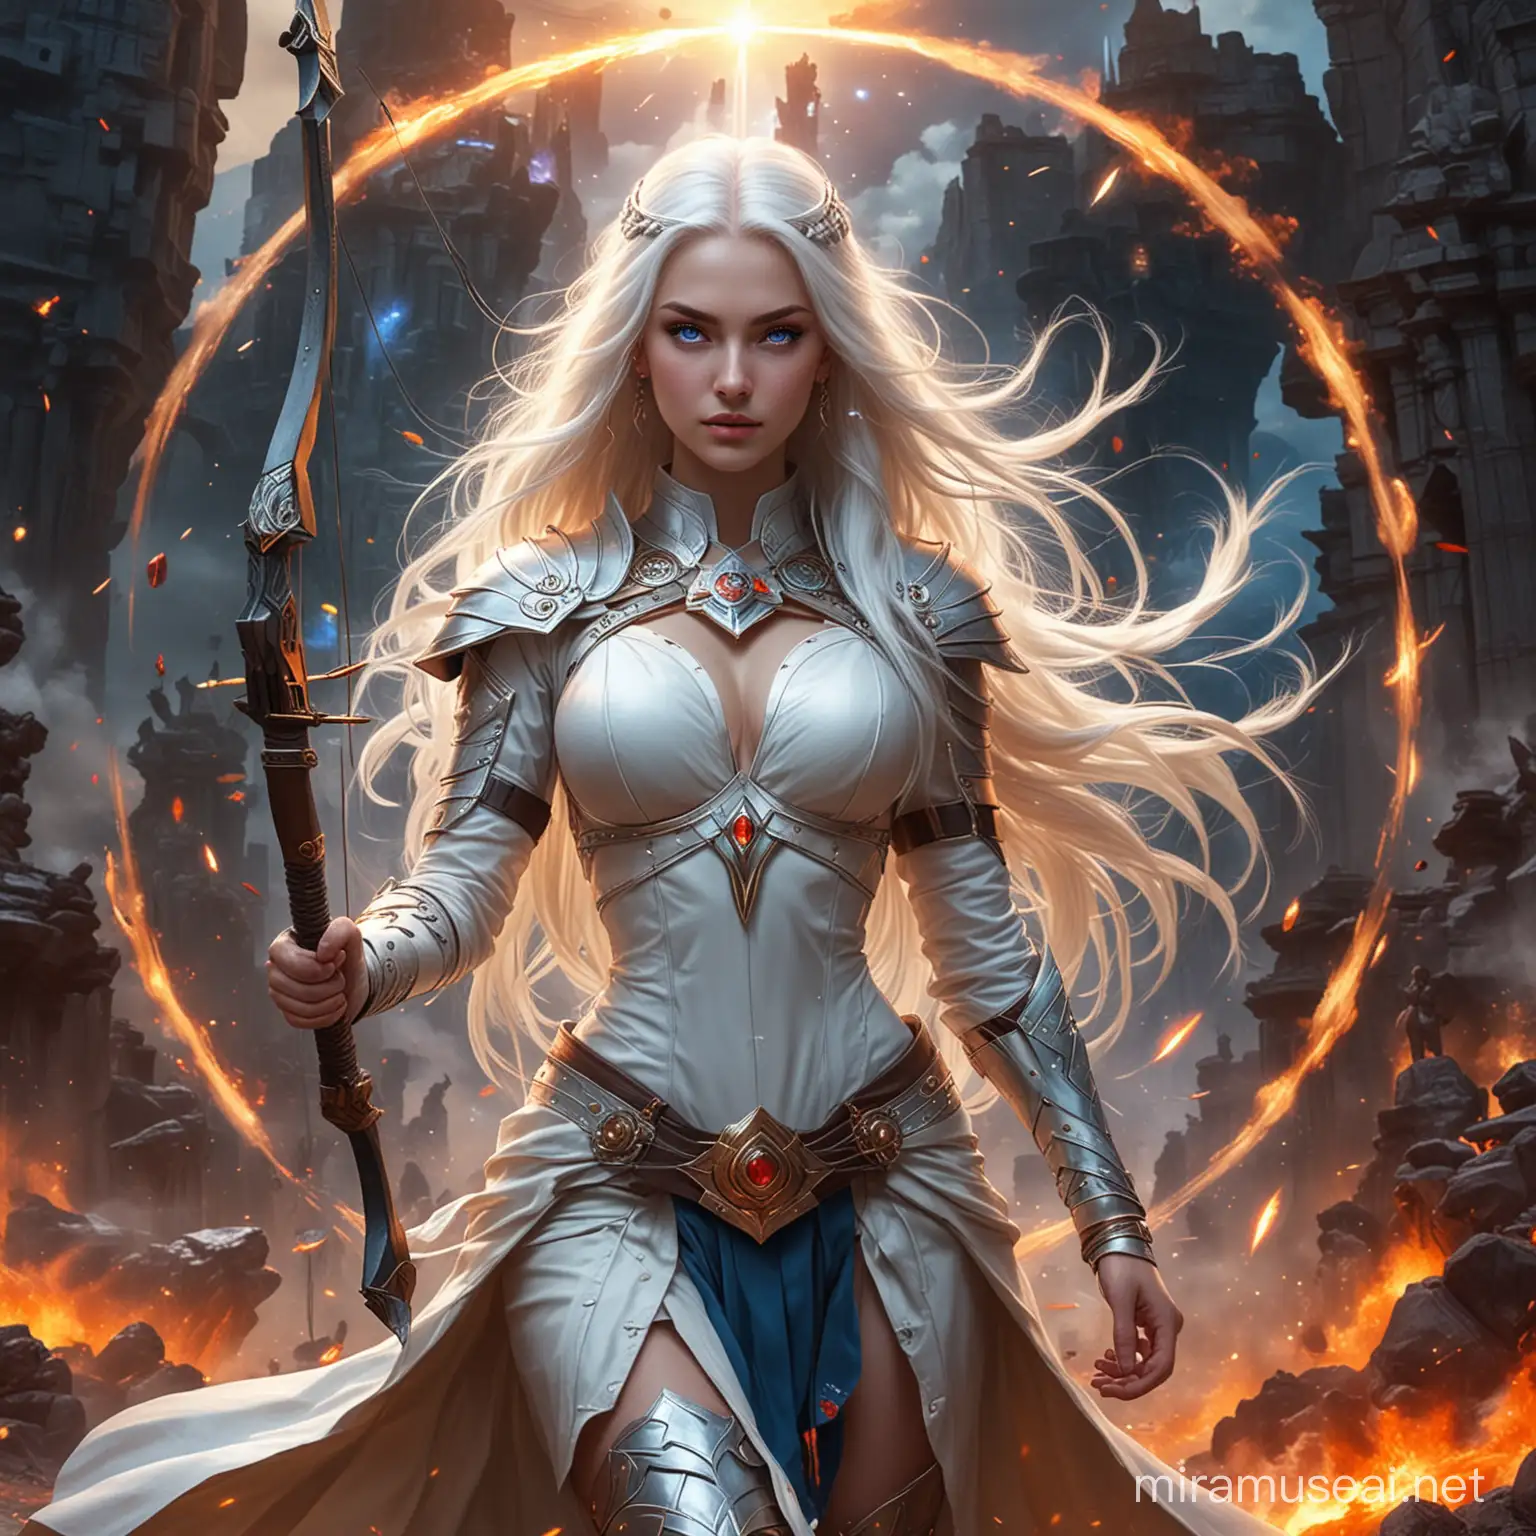 Powerful Goddesses Empresses in White General Combat Suits amidst Cosmic Energy and Fire